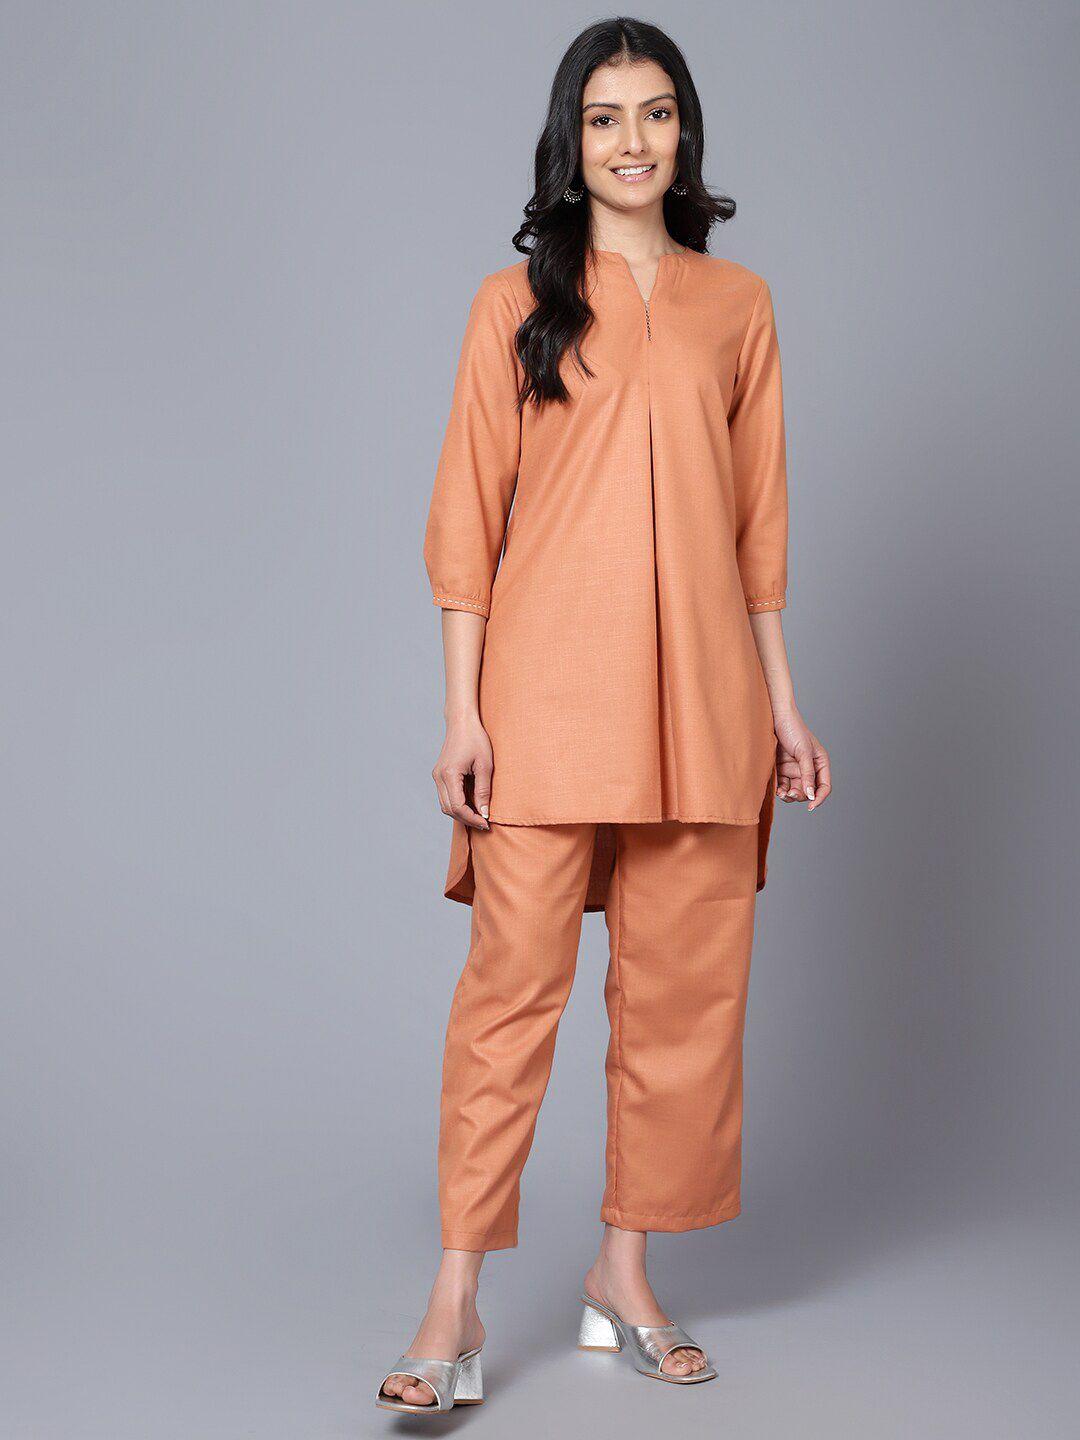 baesd tunic with trousers co-ords